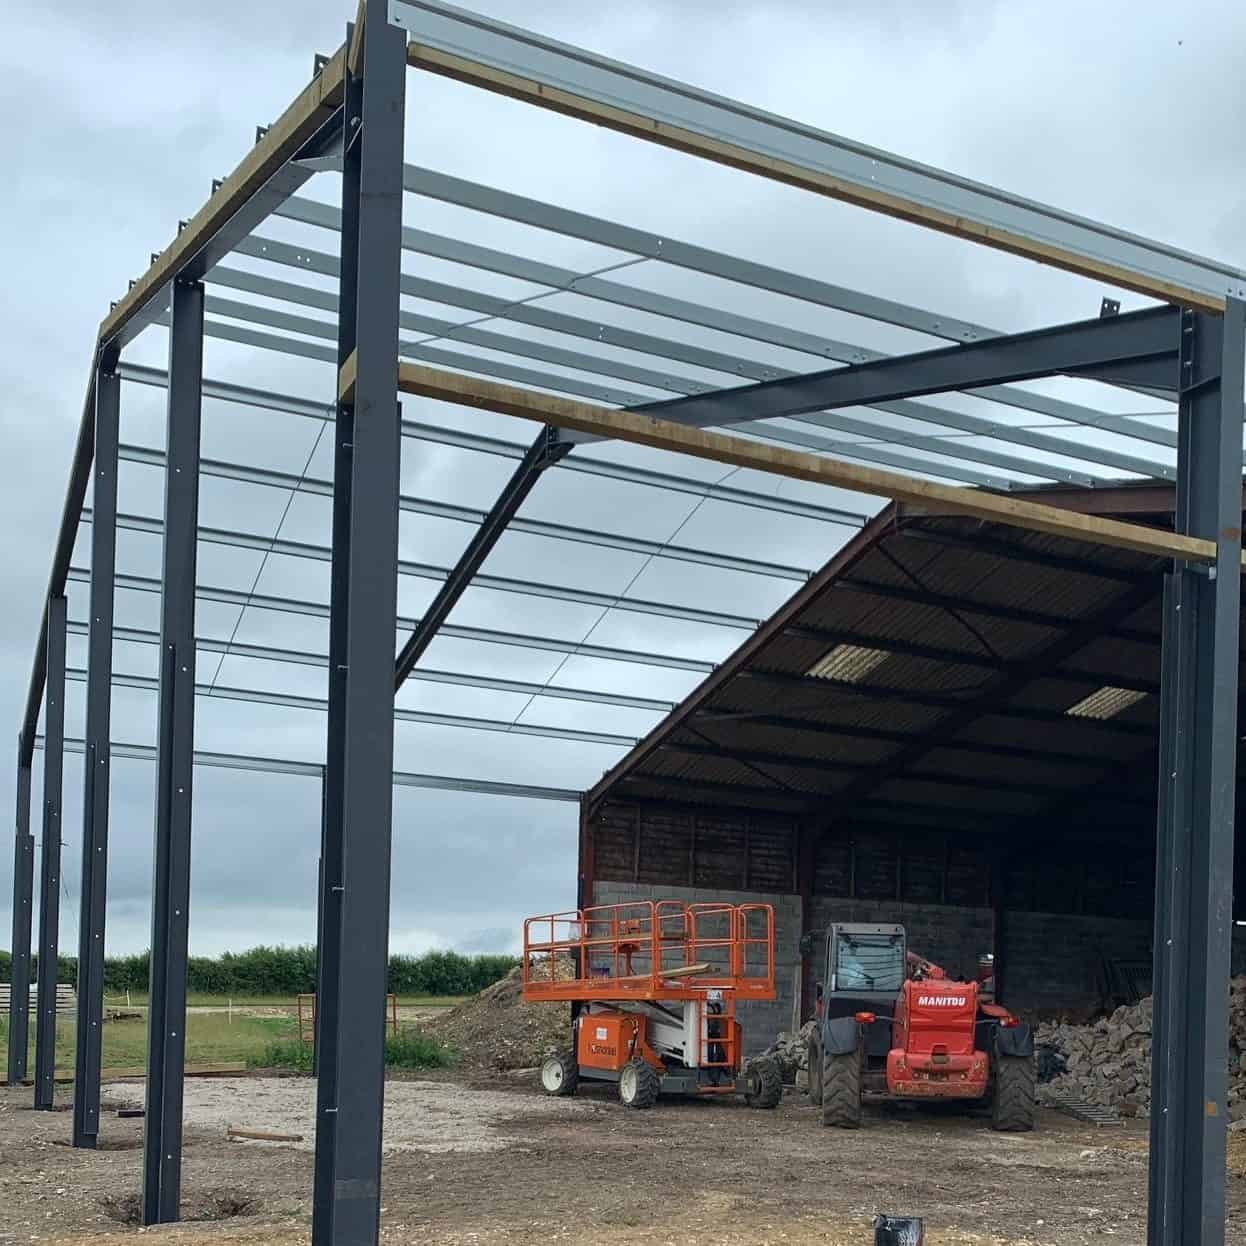 Steel barn being constructed